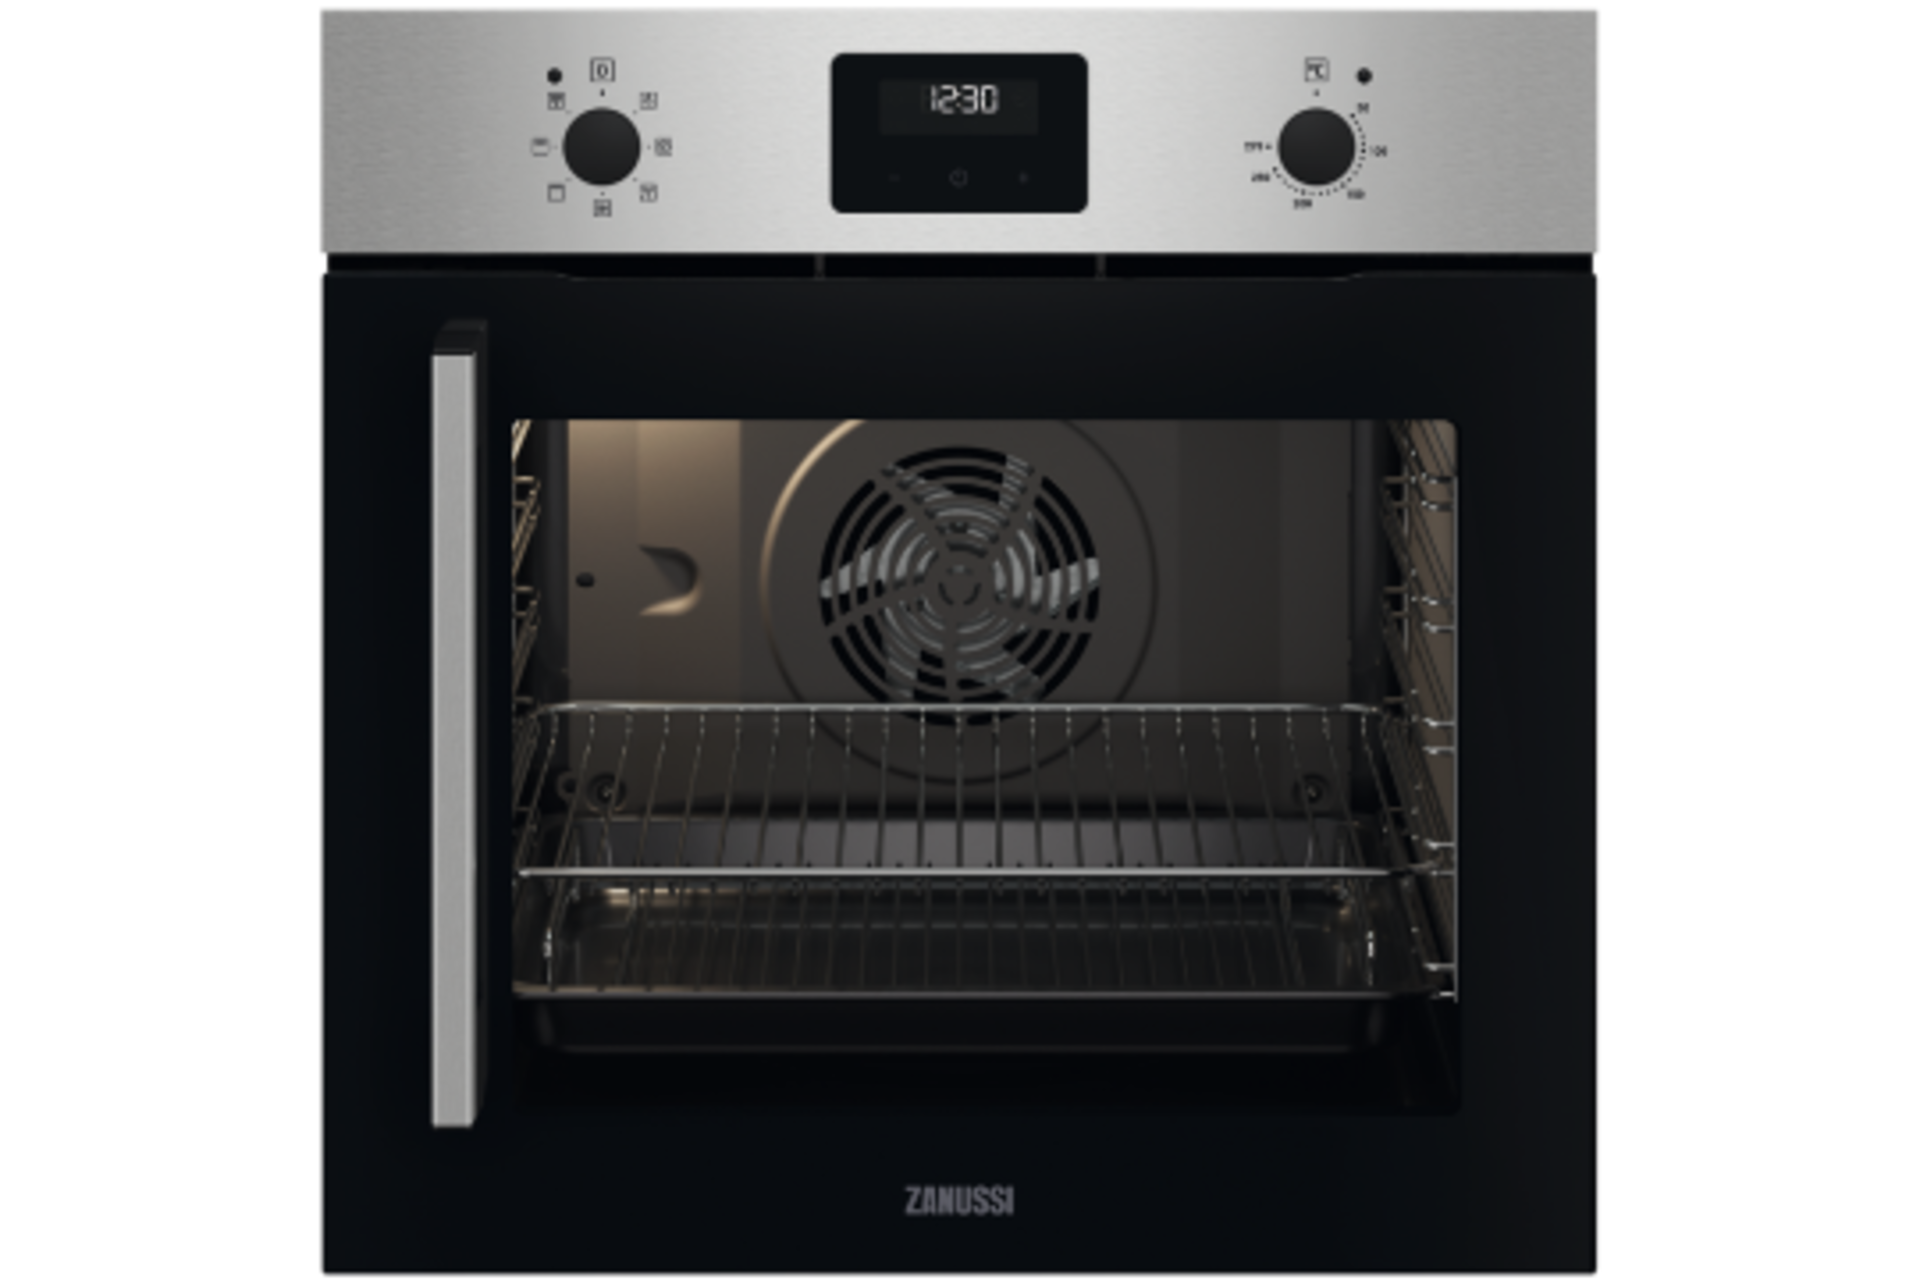 31k/1 New Zanussi ZOCNX3XR Built In Electric Single Oven. RRP £569.00. The Series 20 FanCook Oven